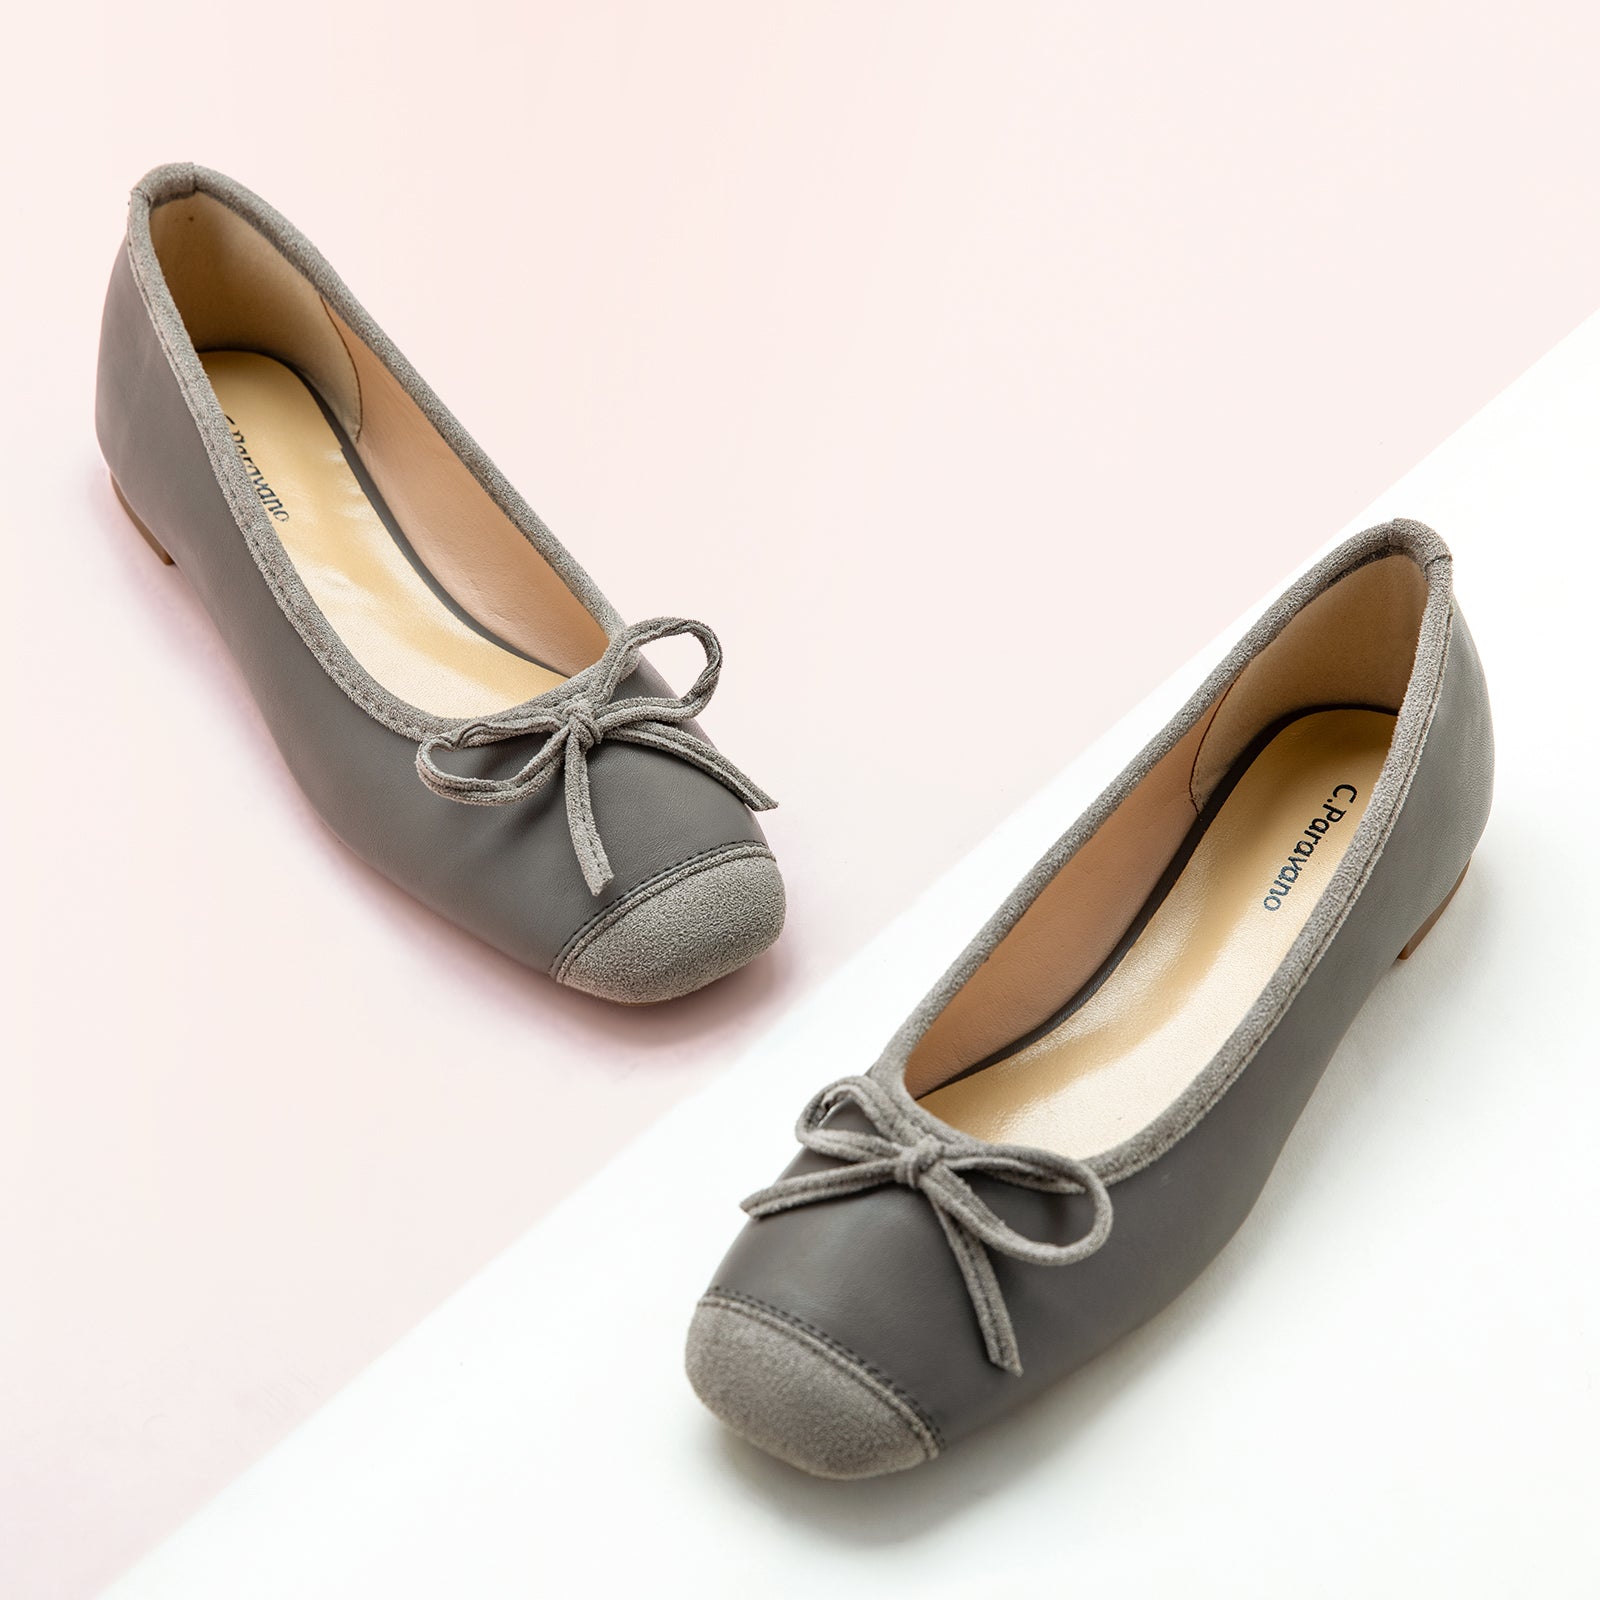 Suede Toe Bowknot Ballet Flats in Dark Grey, a modern and versatile choice for adding a touch of urban sophistication to your ensemble